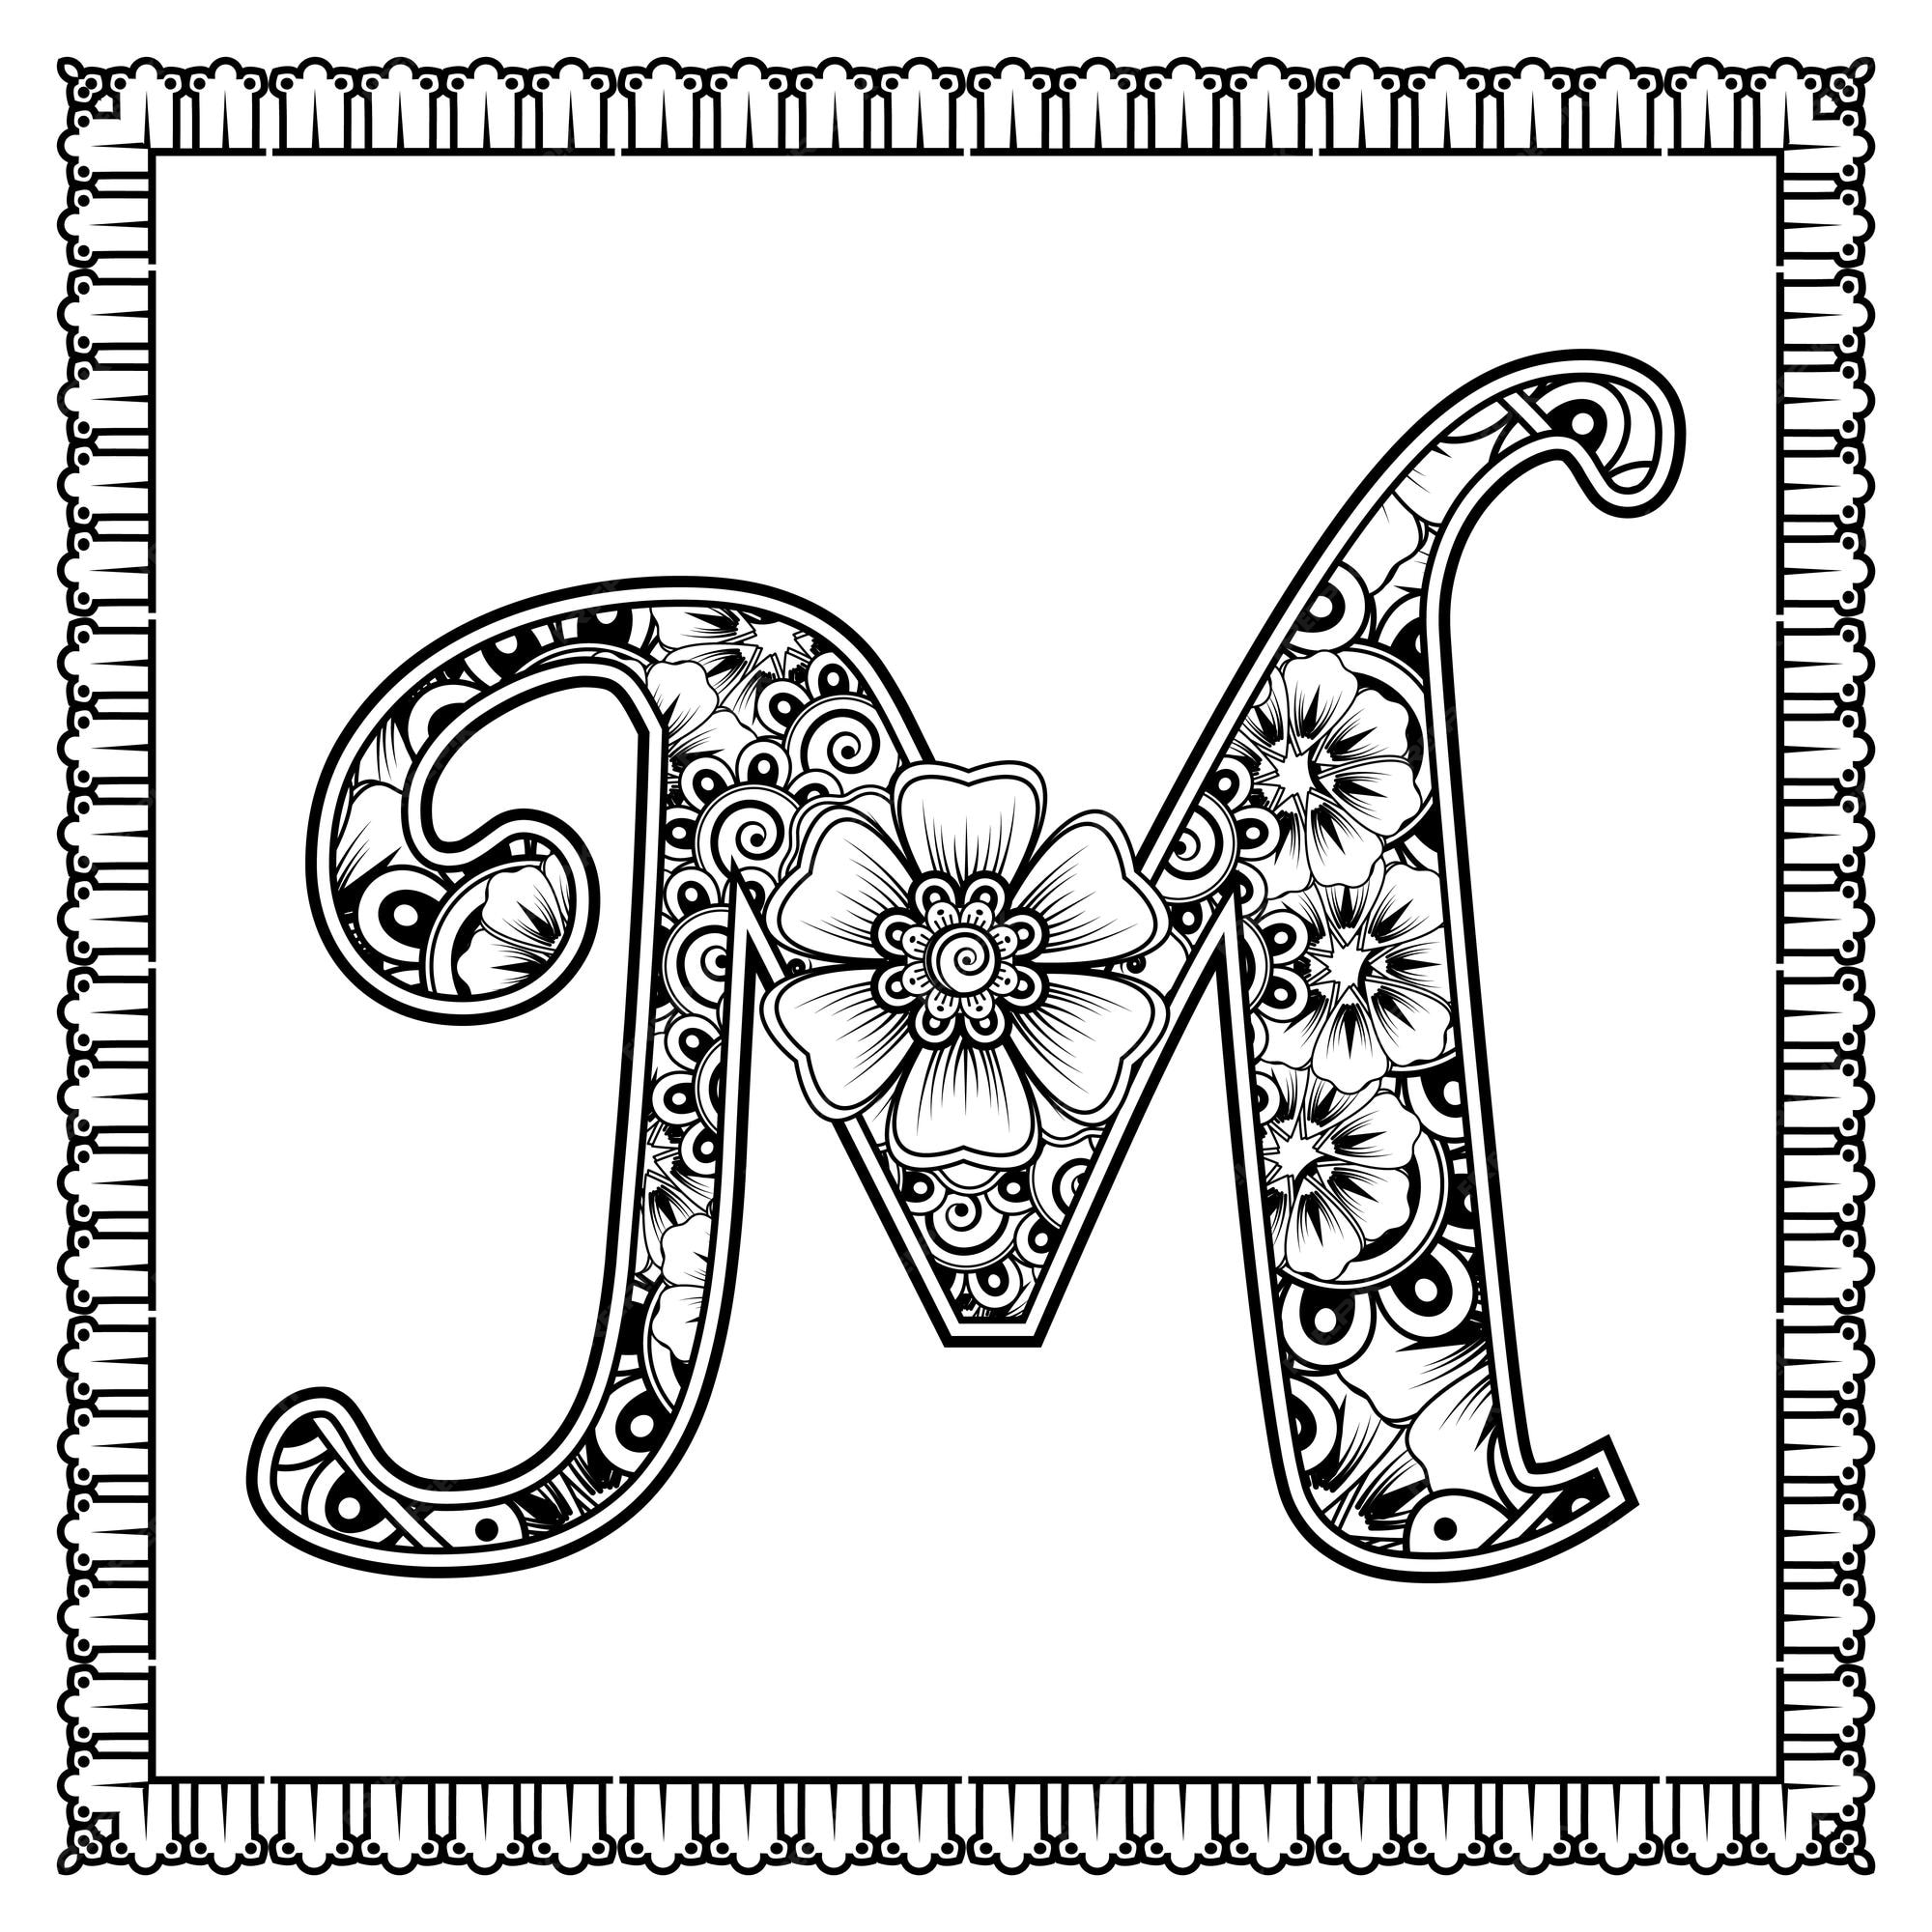 Premium vector letter m made of flowers in mehndi style coloring book page outline handdraw vector illustration